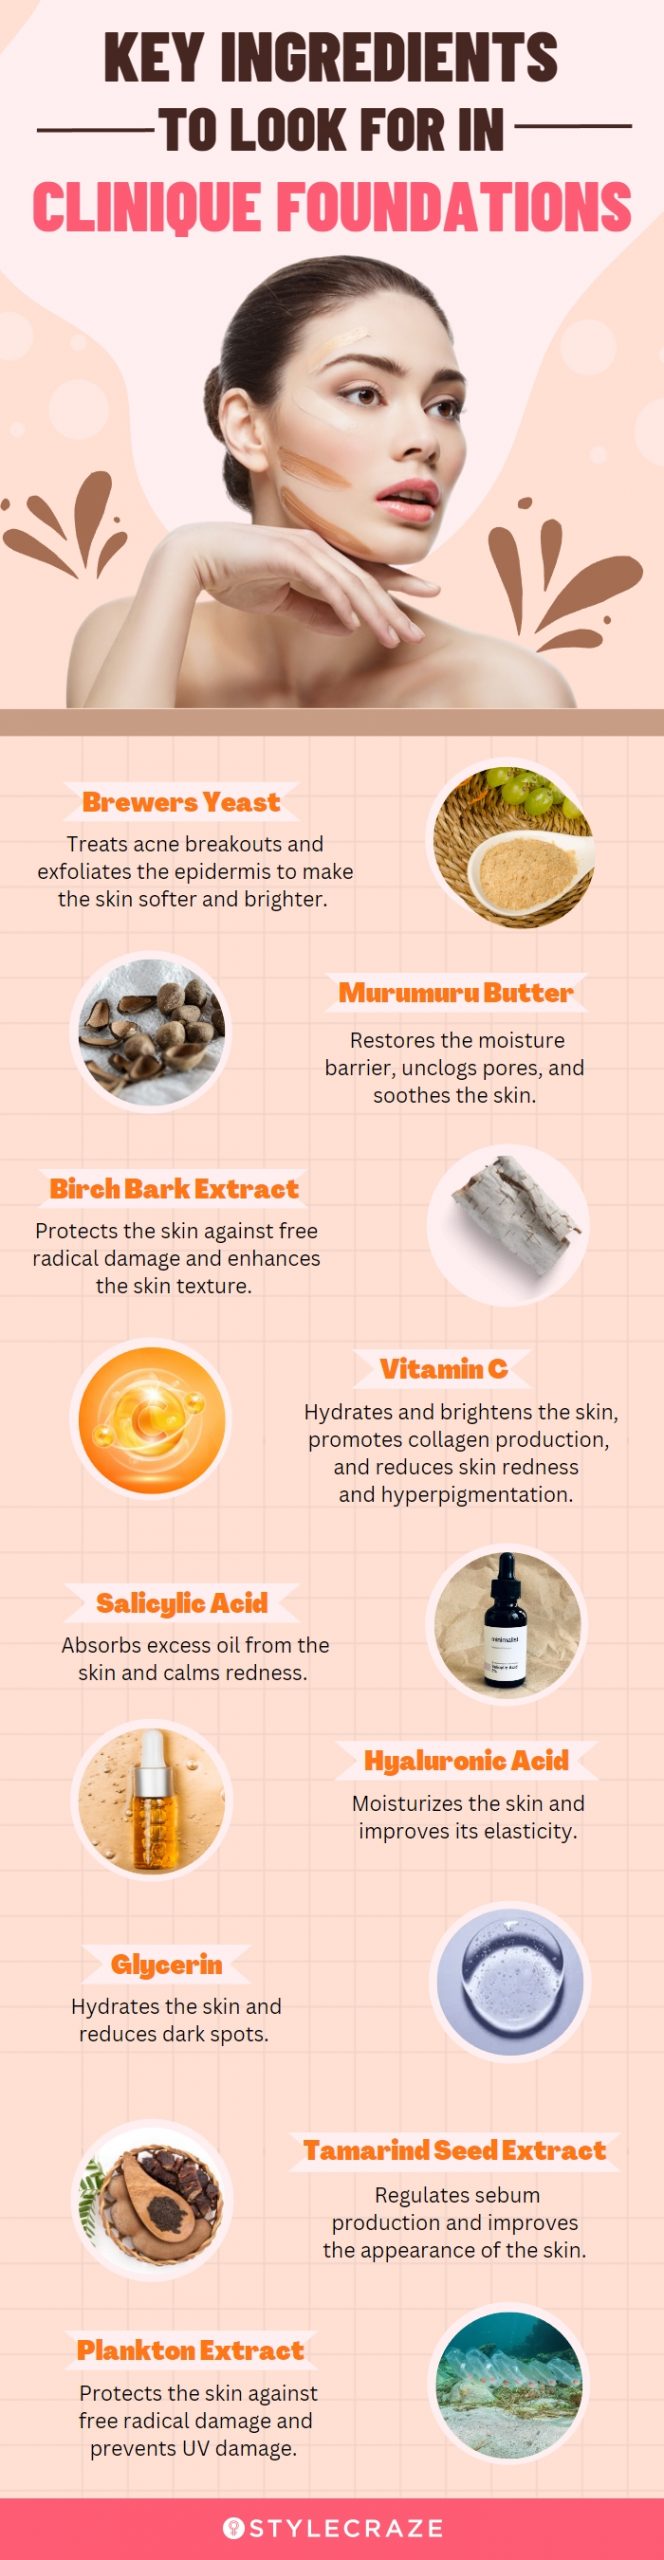 Key Ingredients To Look For In Clinique Foundations (infographic)